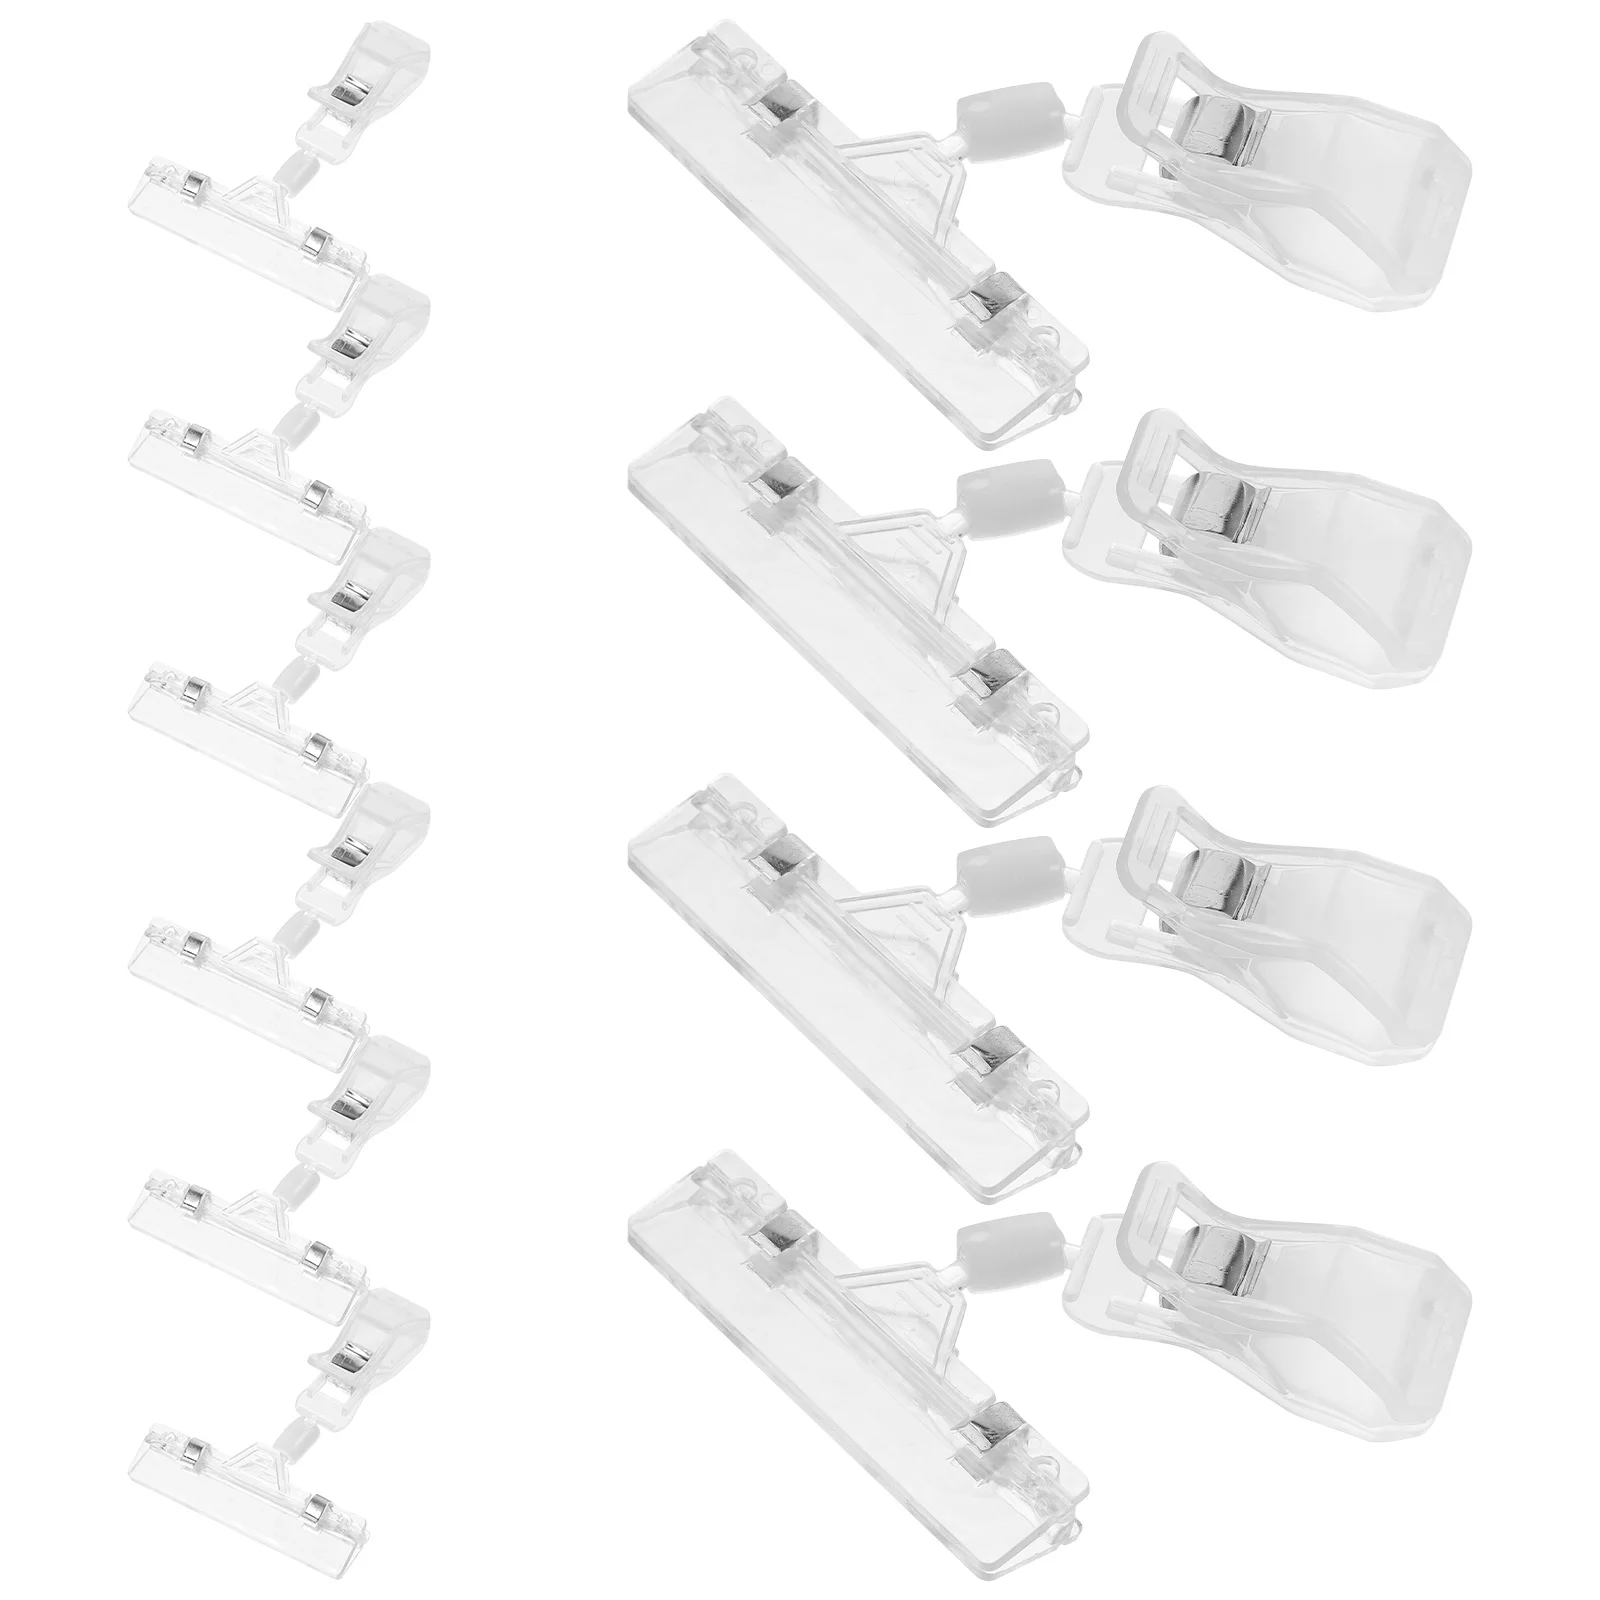 

10 Pcs Universal Advertising Folder Mini Clip Tag Holders Sign Stand Clear Sign Holder Ps Retail Merchandising Signs